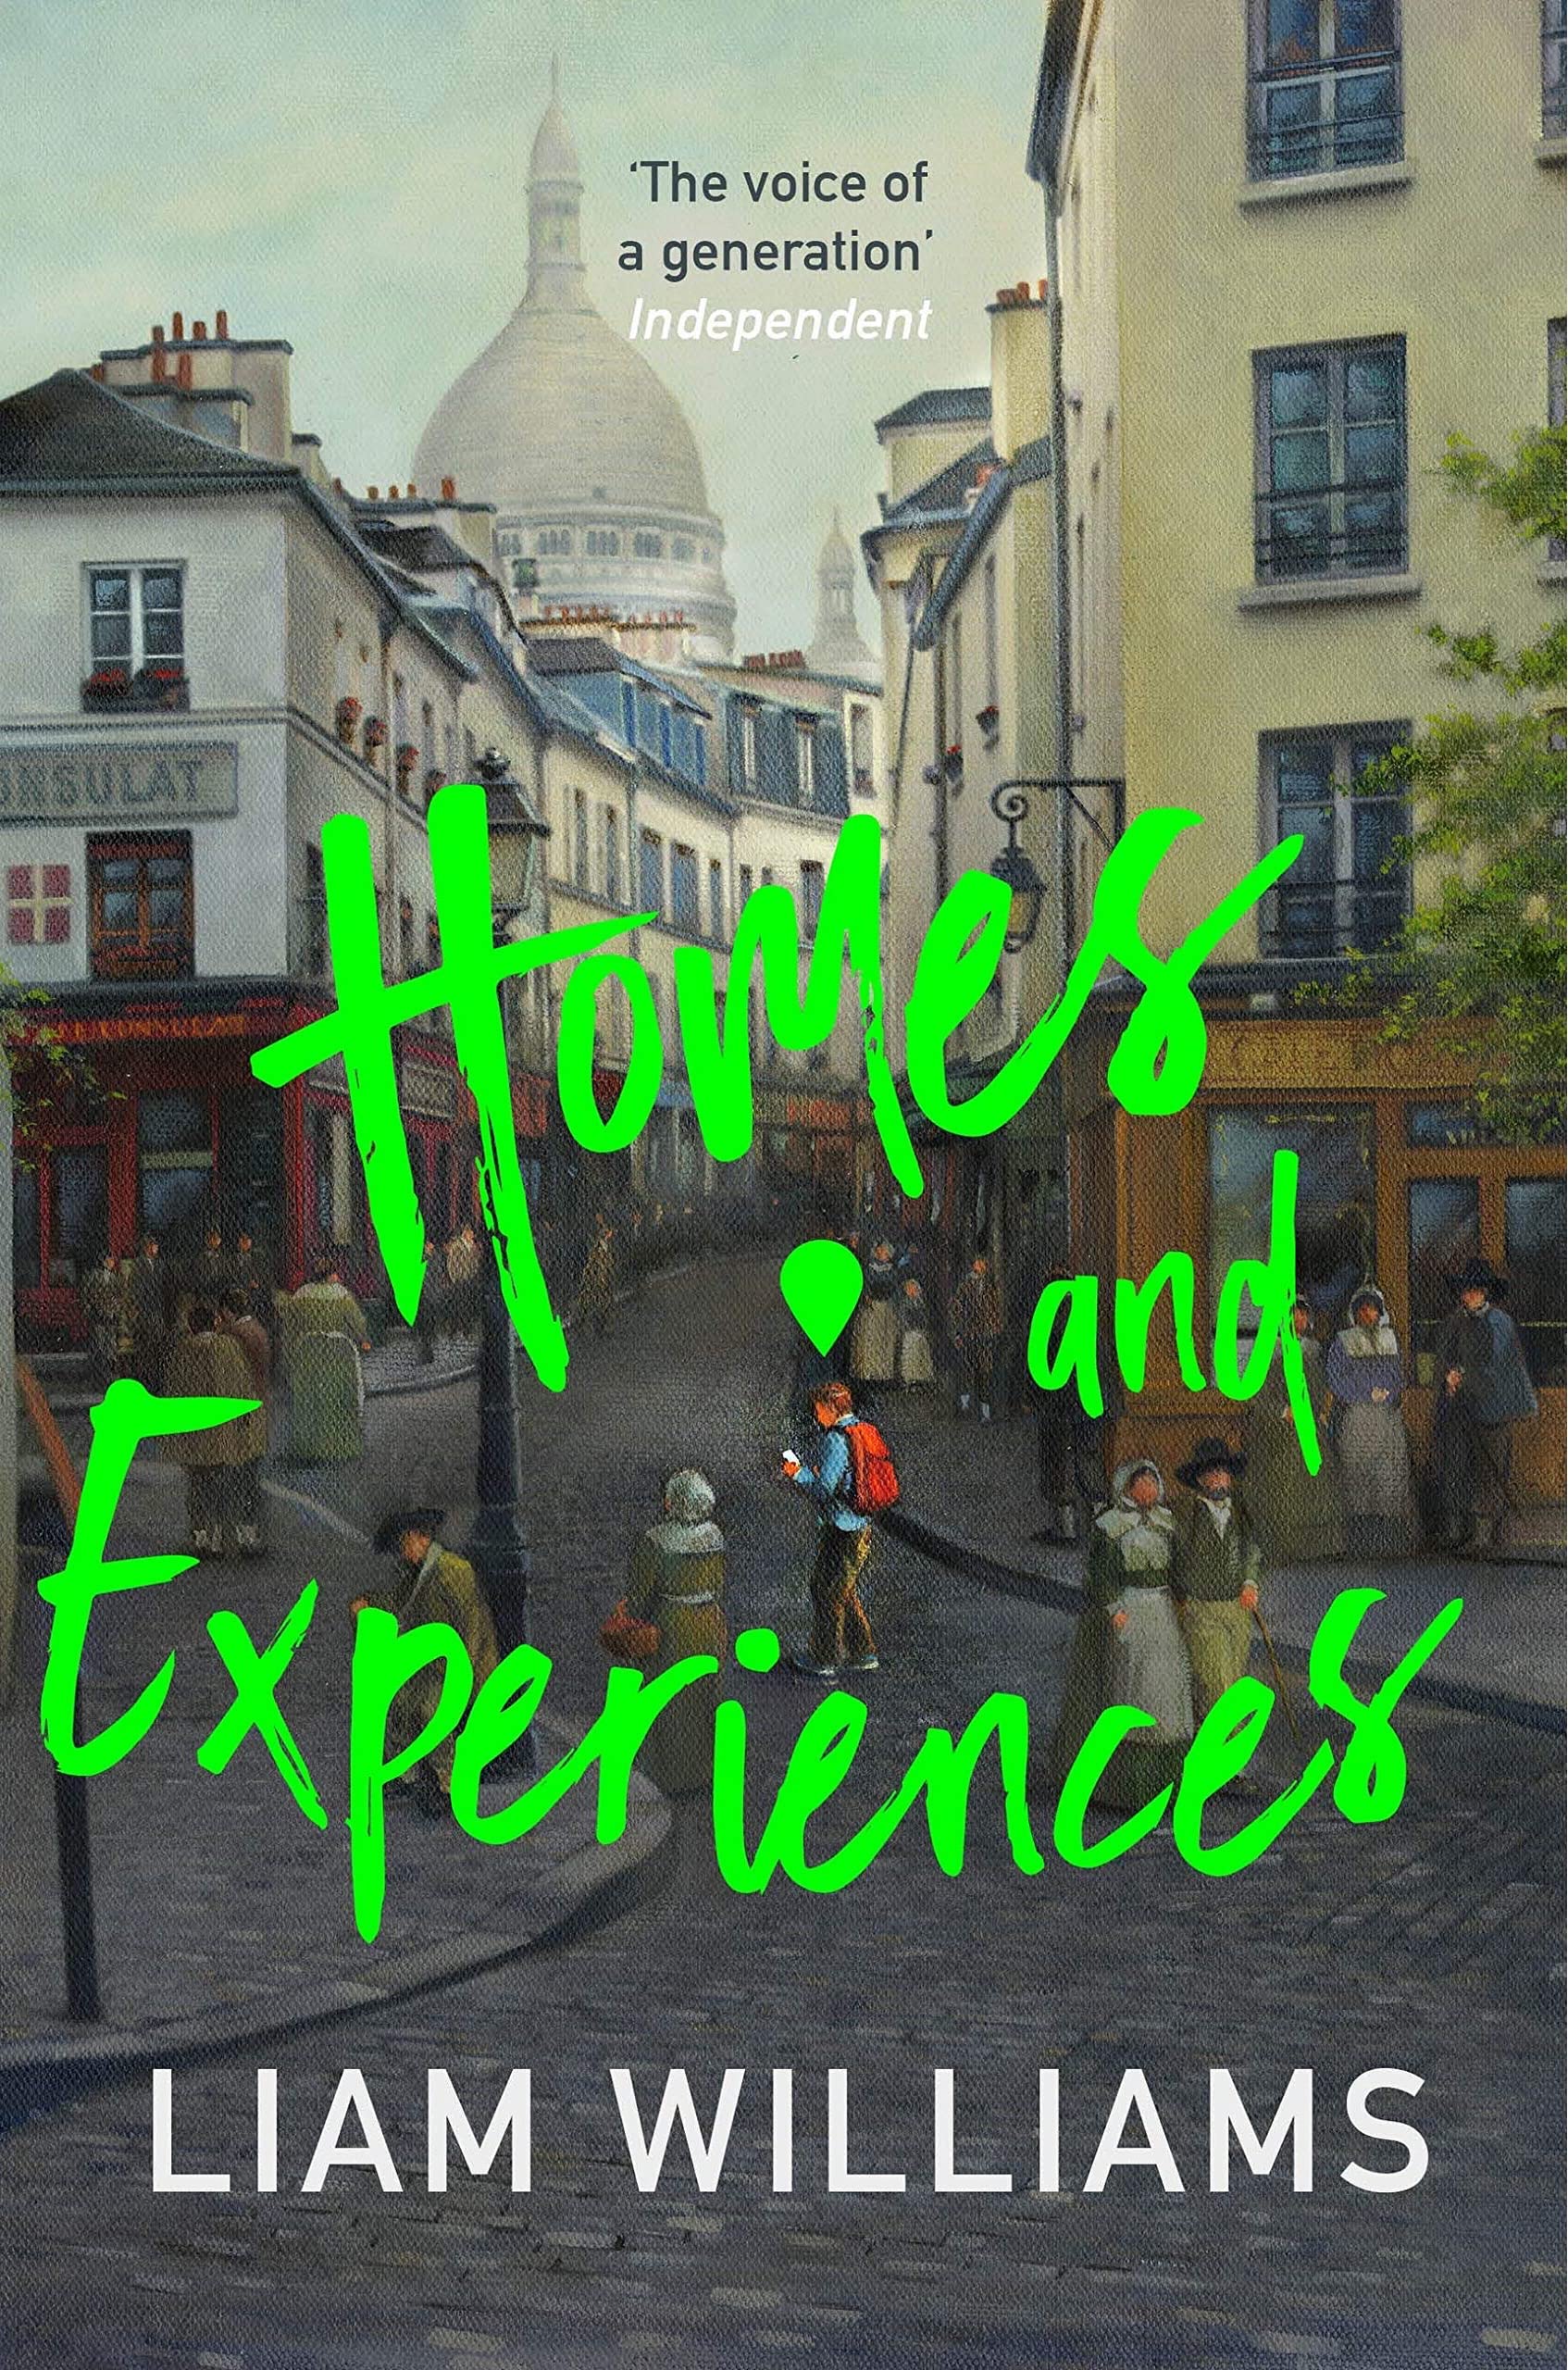 Cover: Homes and experiences, Liam Williams